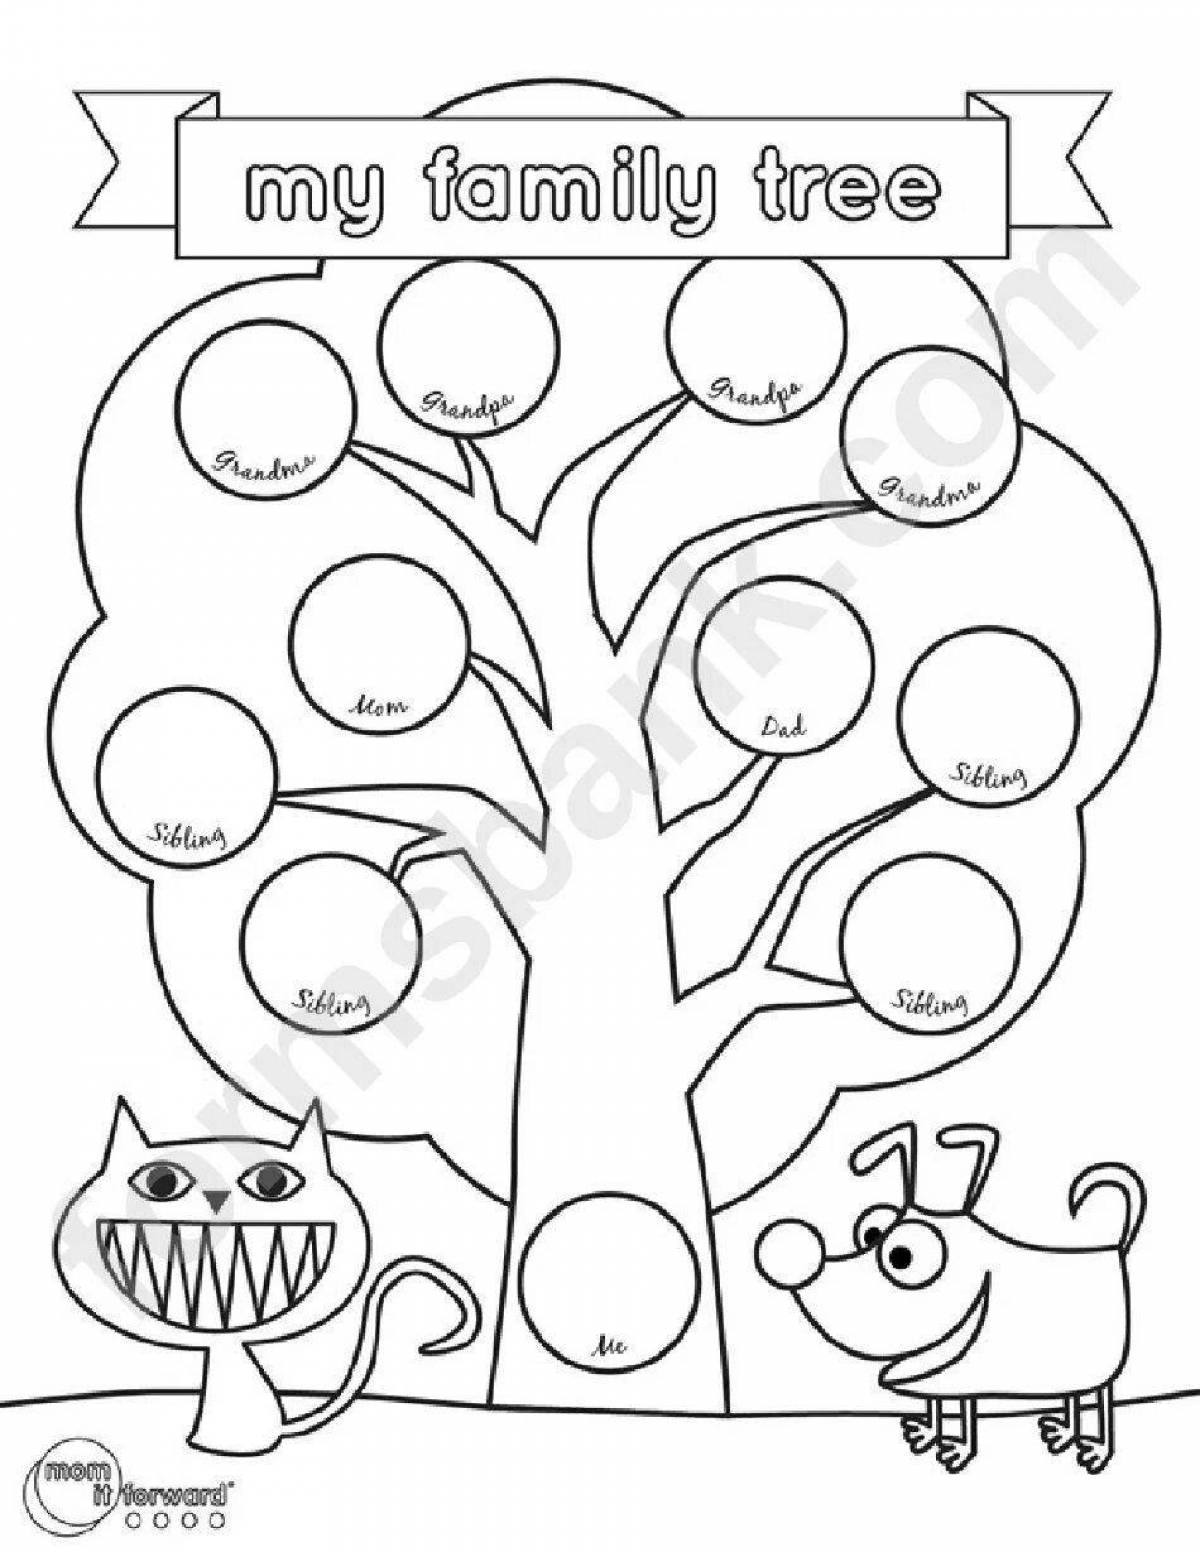 My family's happy coloring page